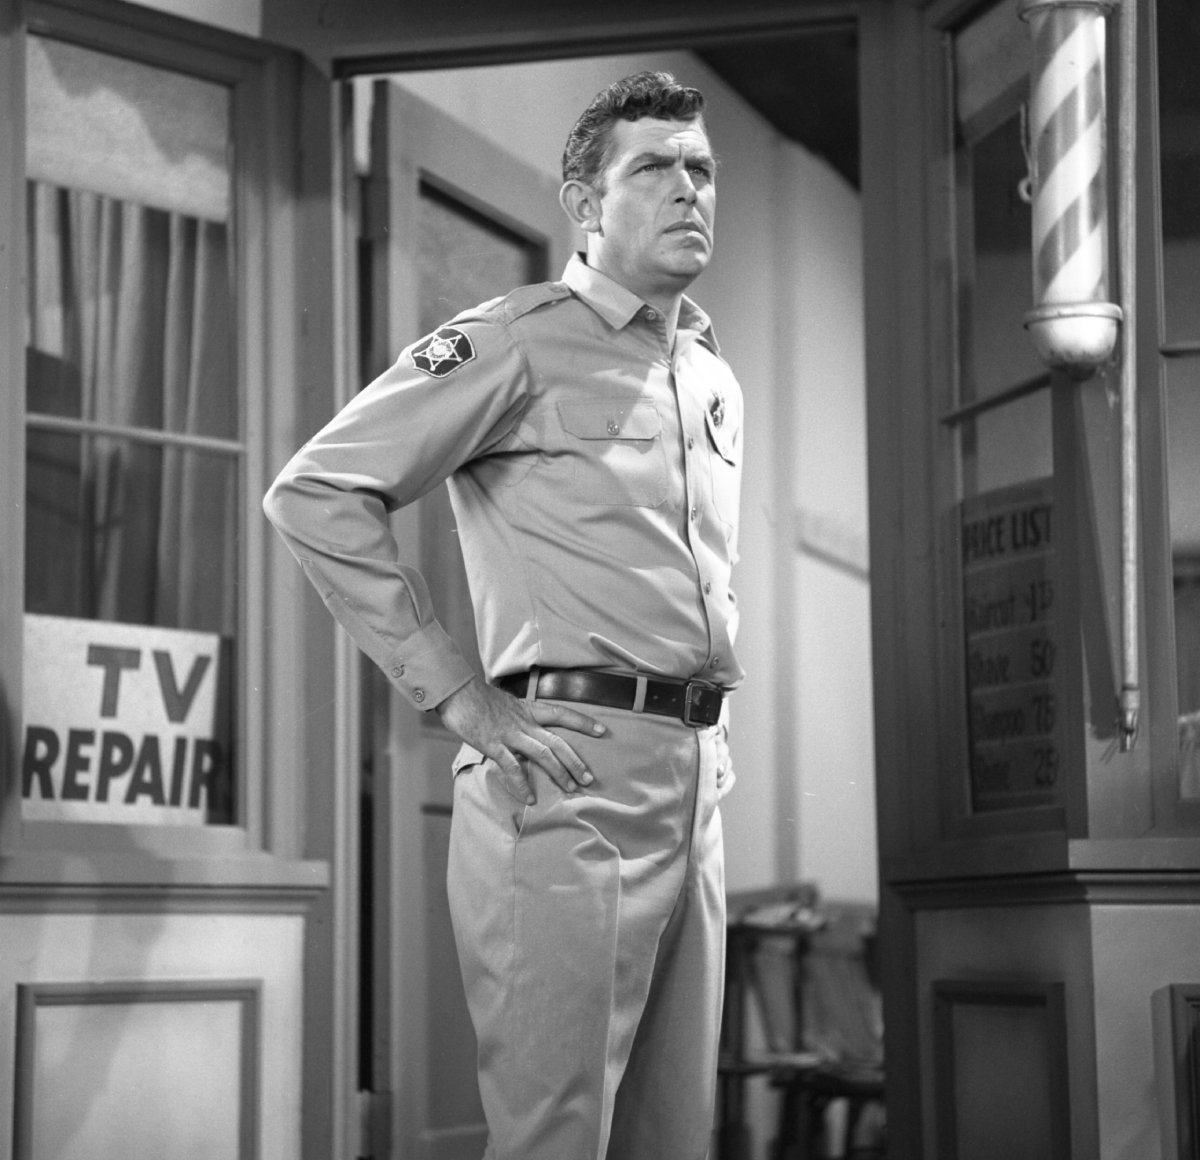 Actor Andy Griffith as Sheriff Andy Taylor of 'The Andy Griffith Show'